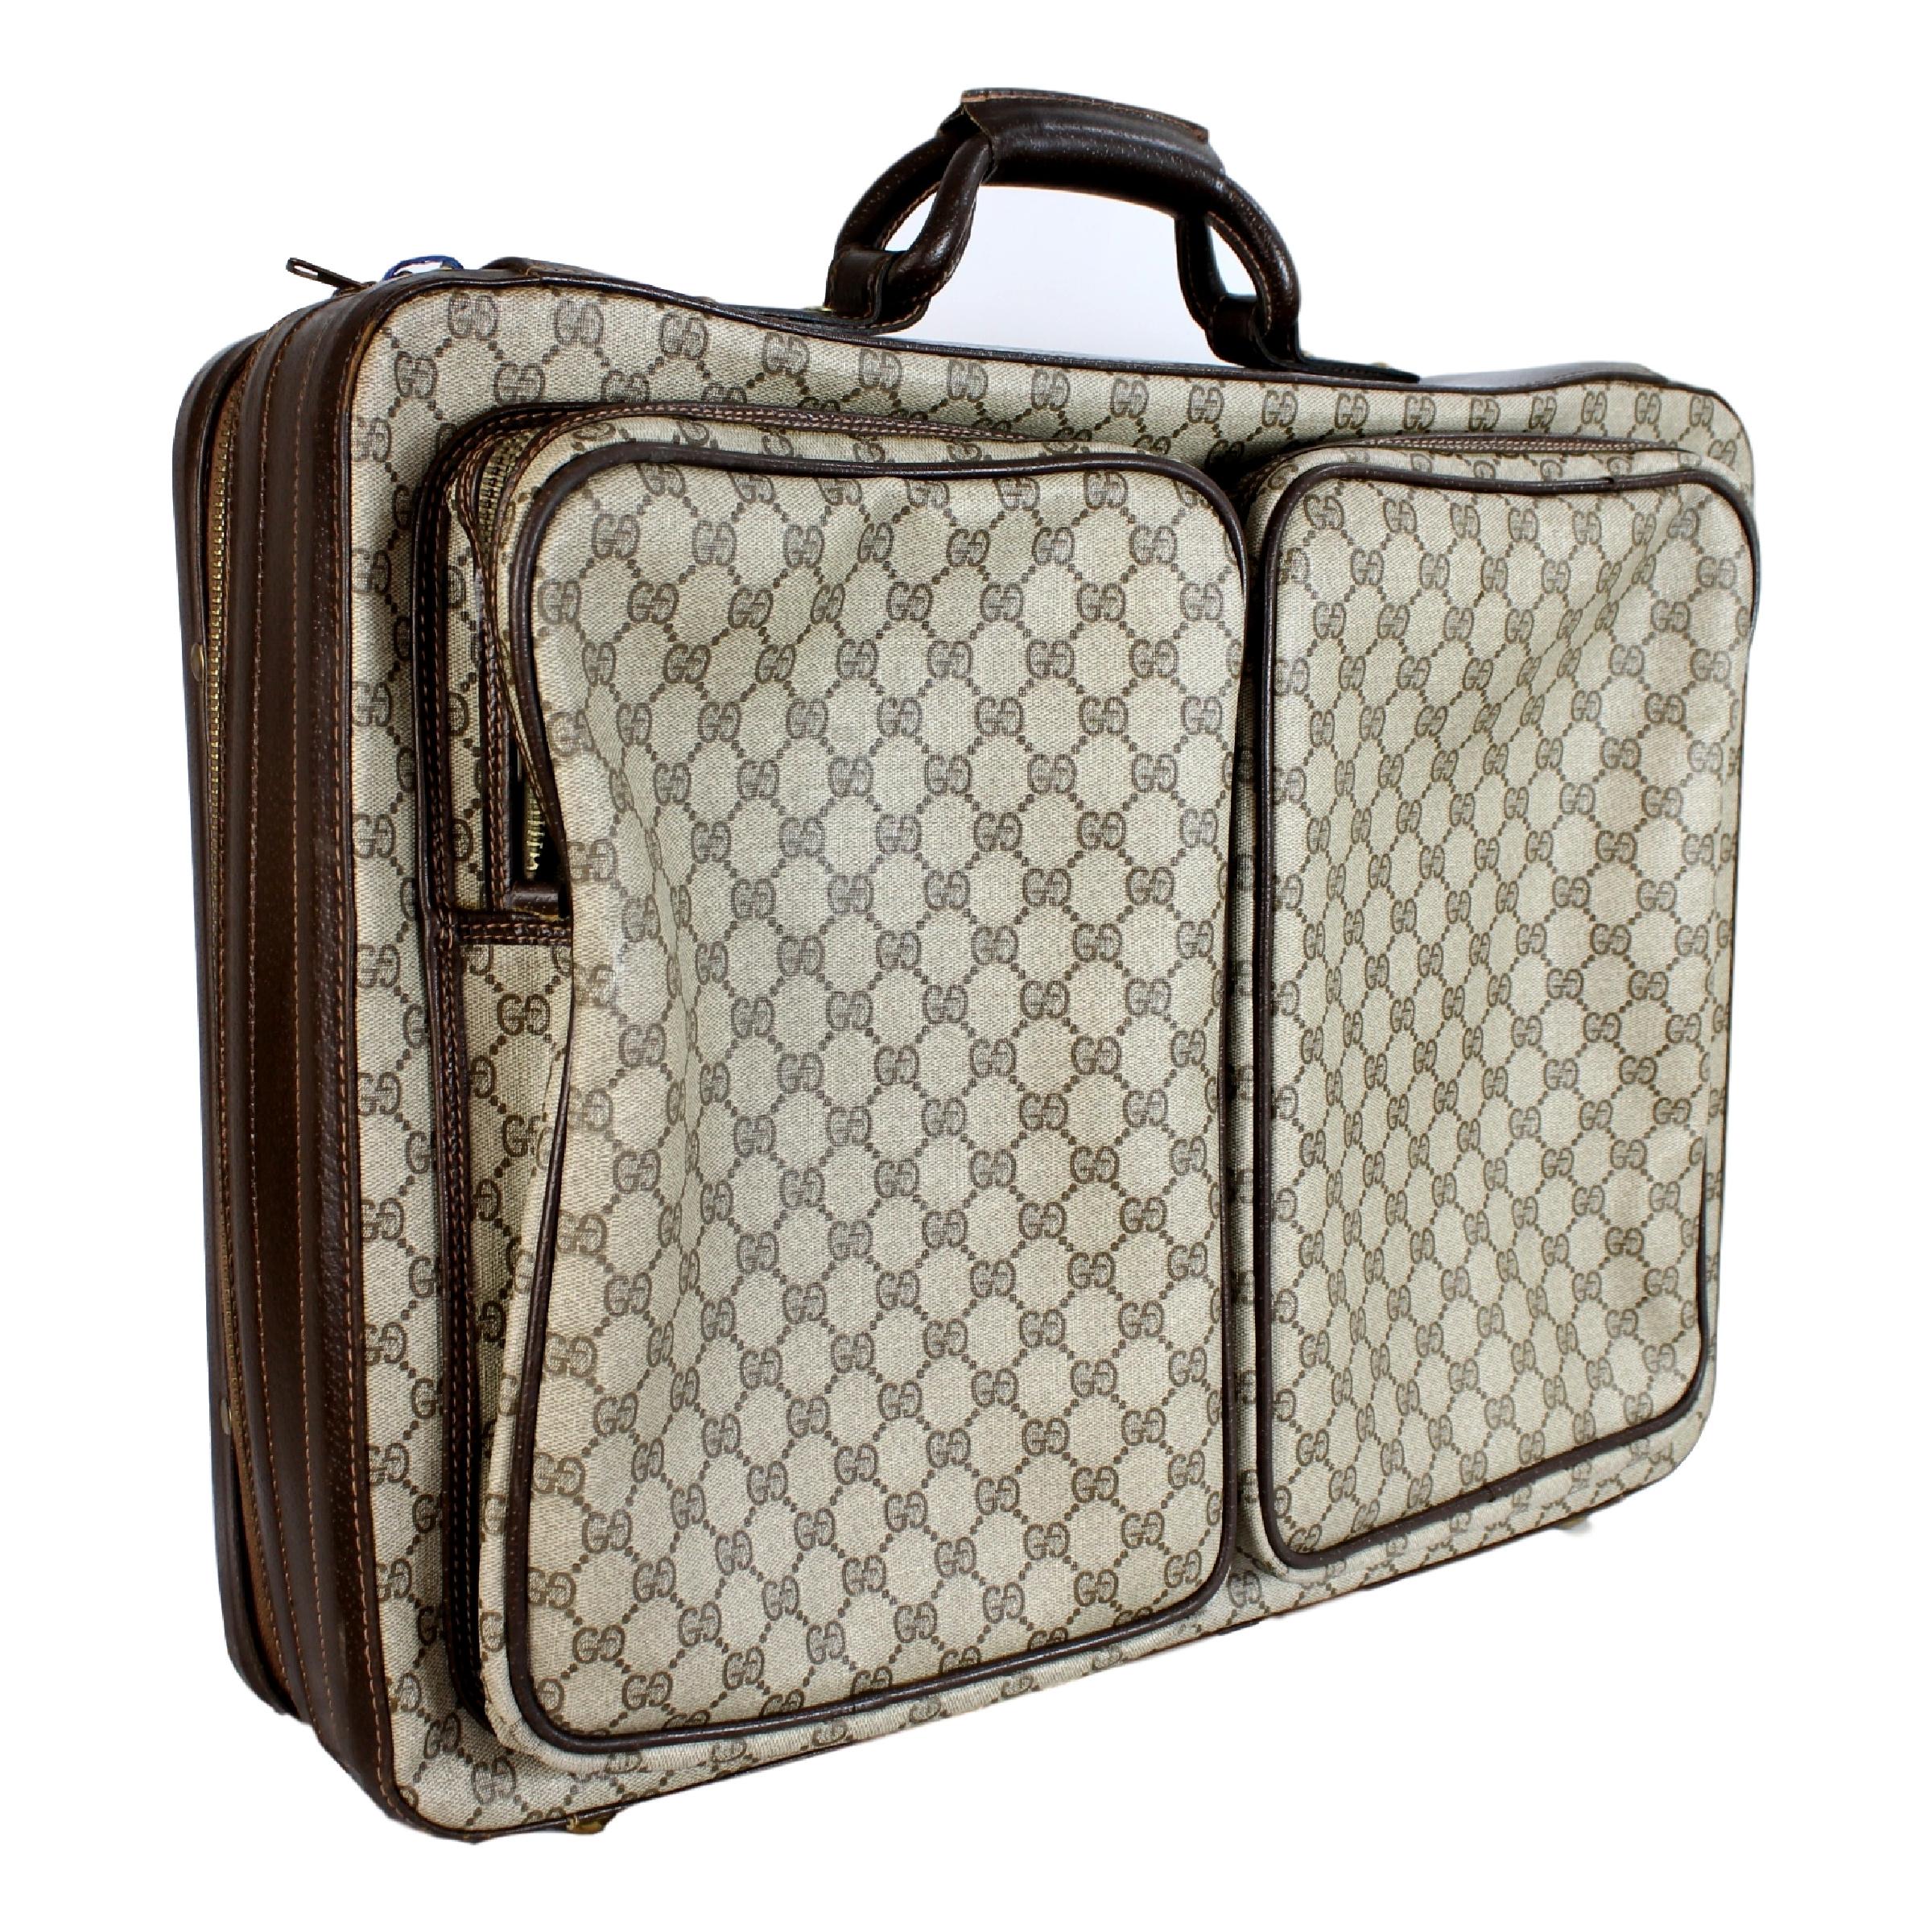 1980s Gucci Monogram Beige Leather Suitcase Luggage Bag 3